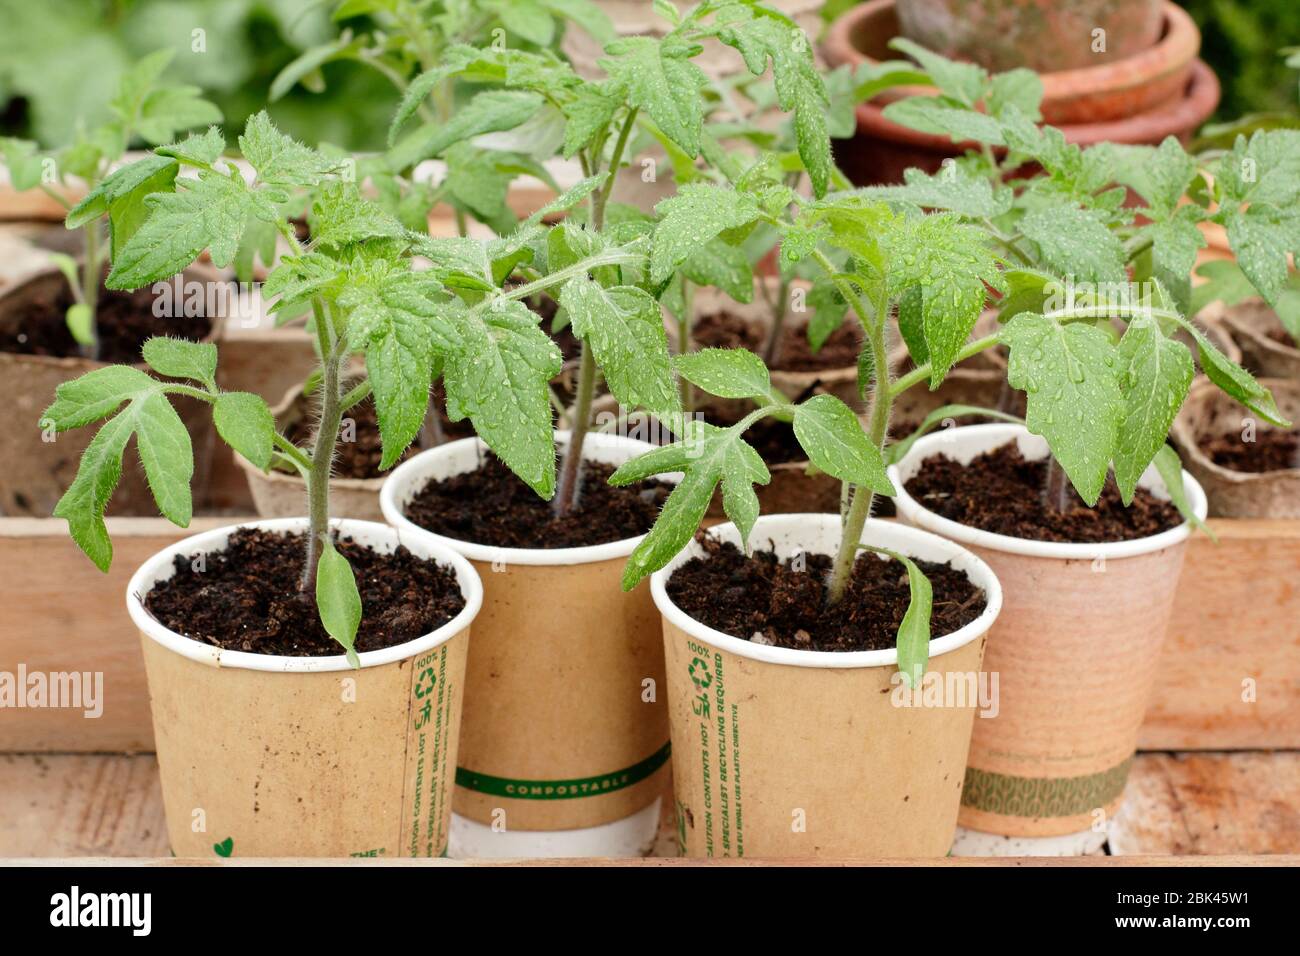 Solanum lycopersicum. Home grown tomato seedlings planted in upcycled compostable coffee cups during the coronavirus Covid 19 lockdown. UK Stock Photo